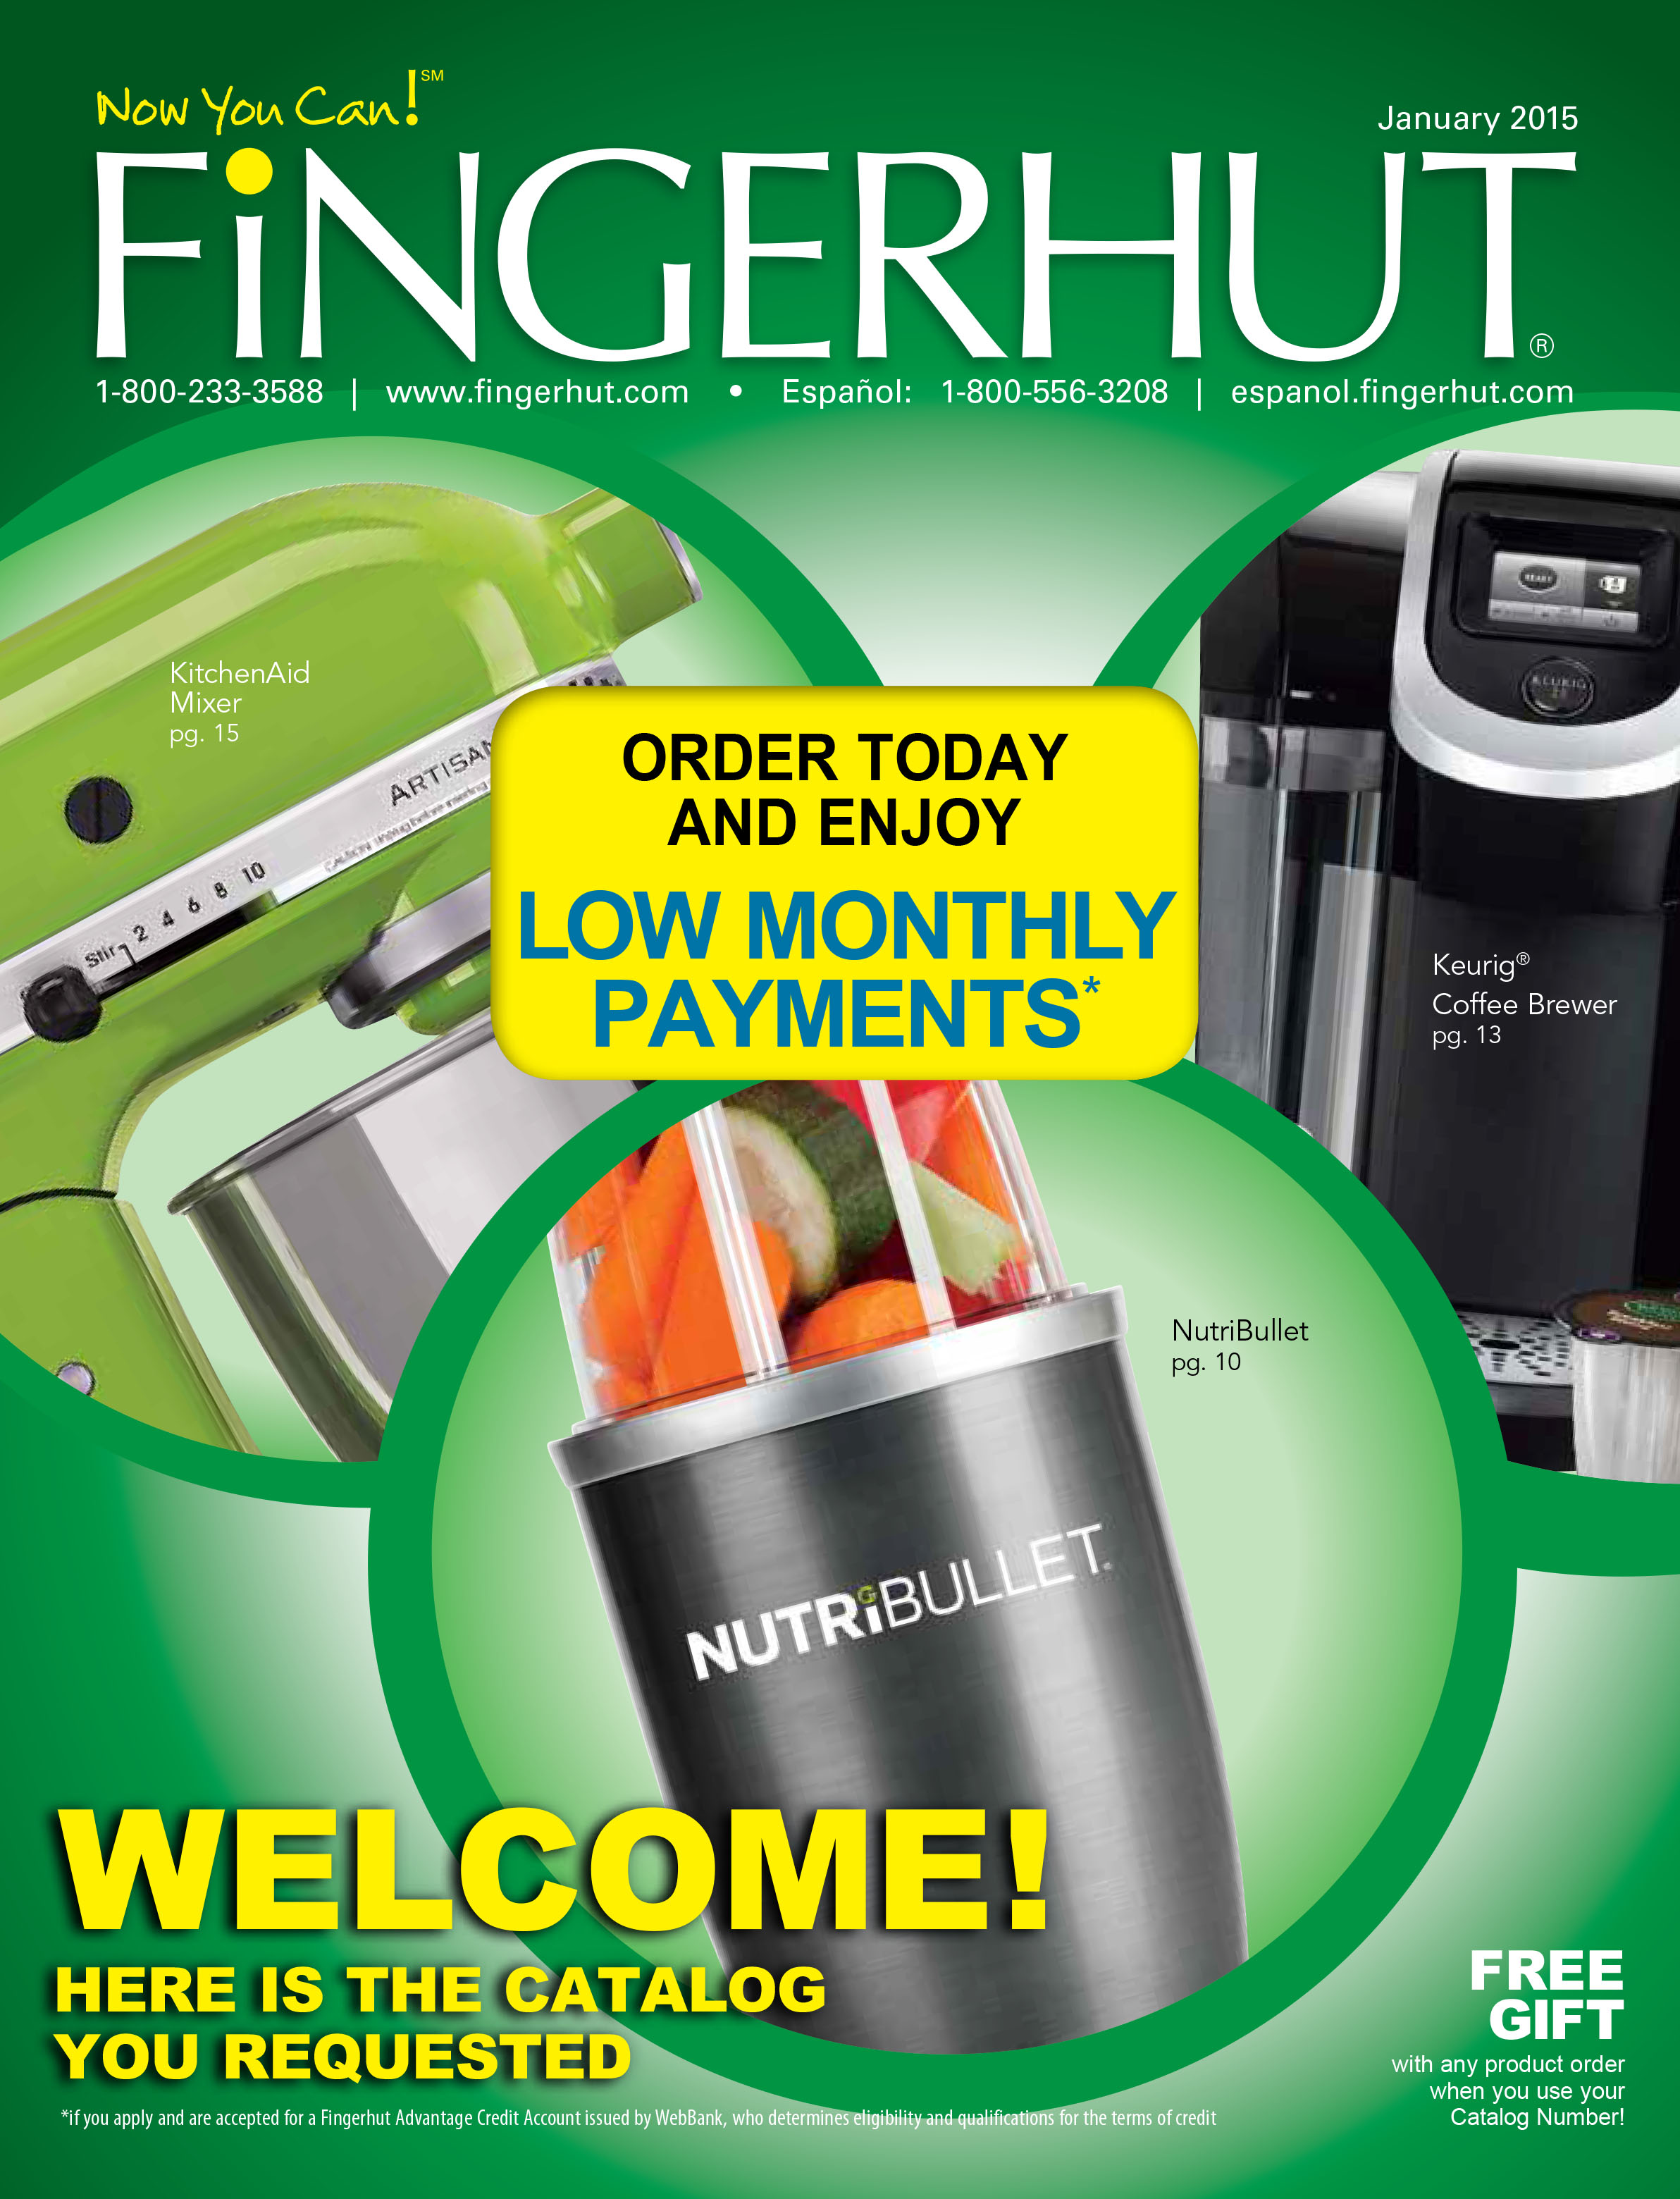 What are some products Fingerhut offers online?